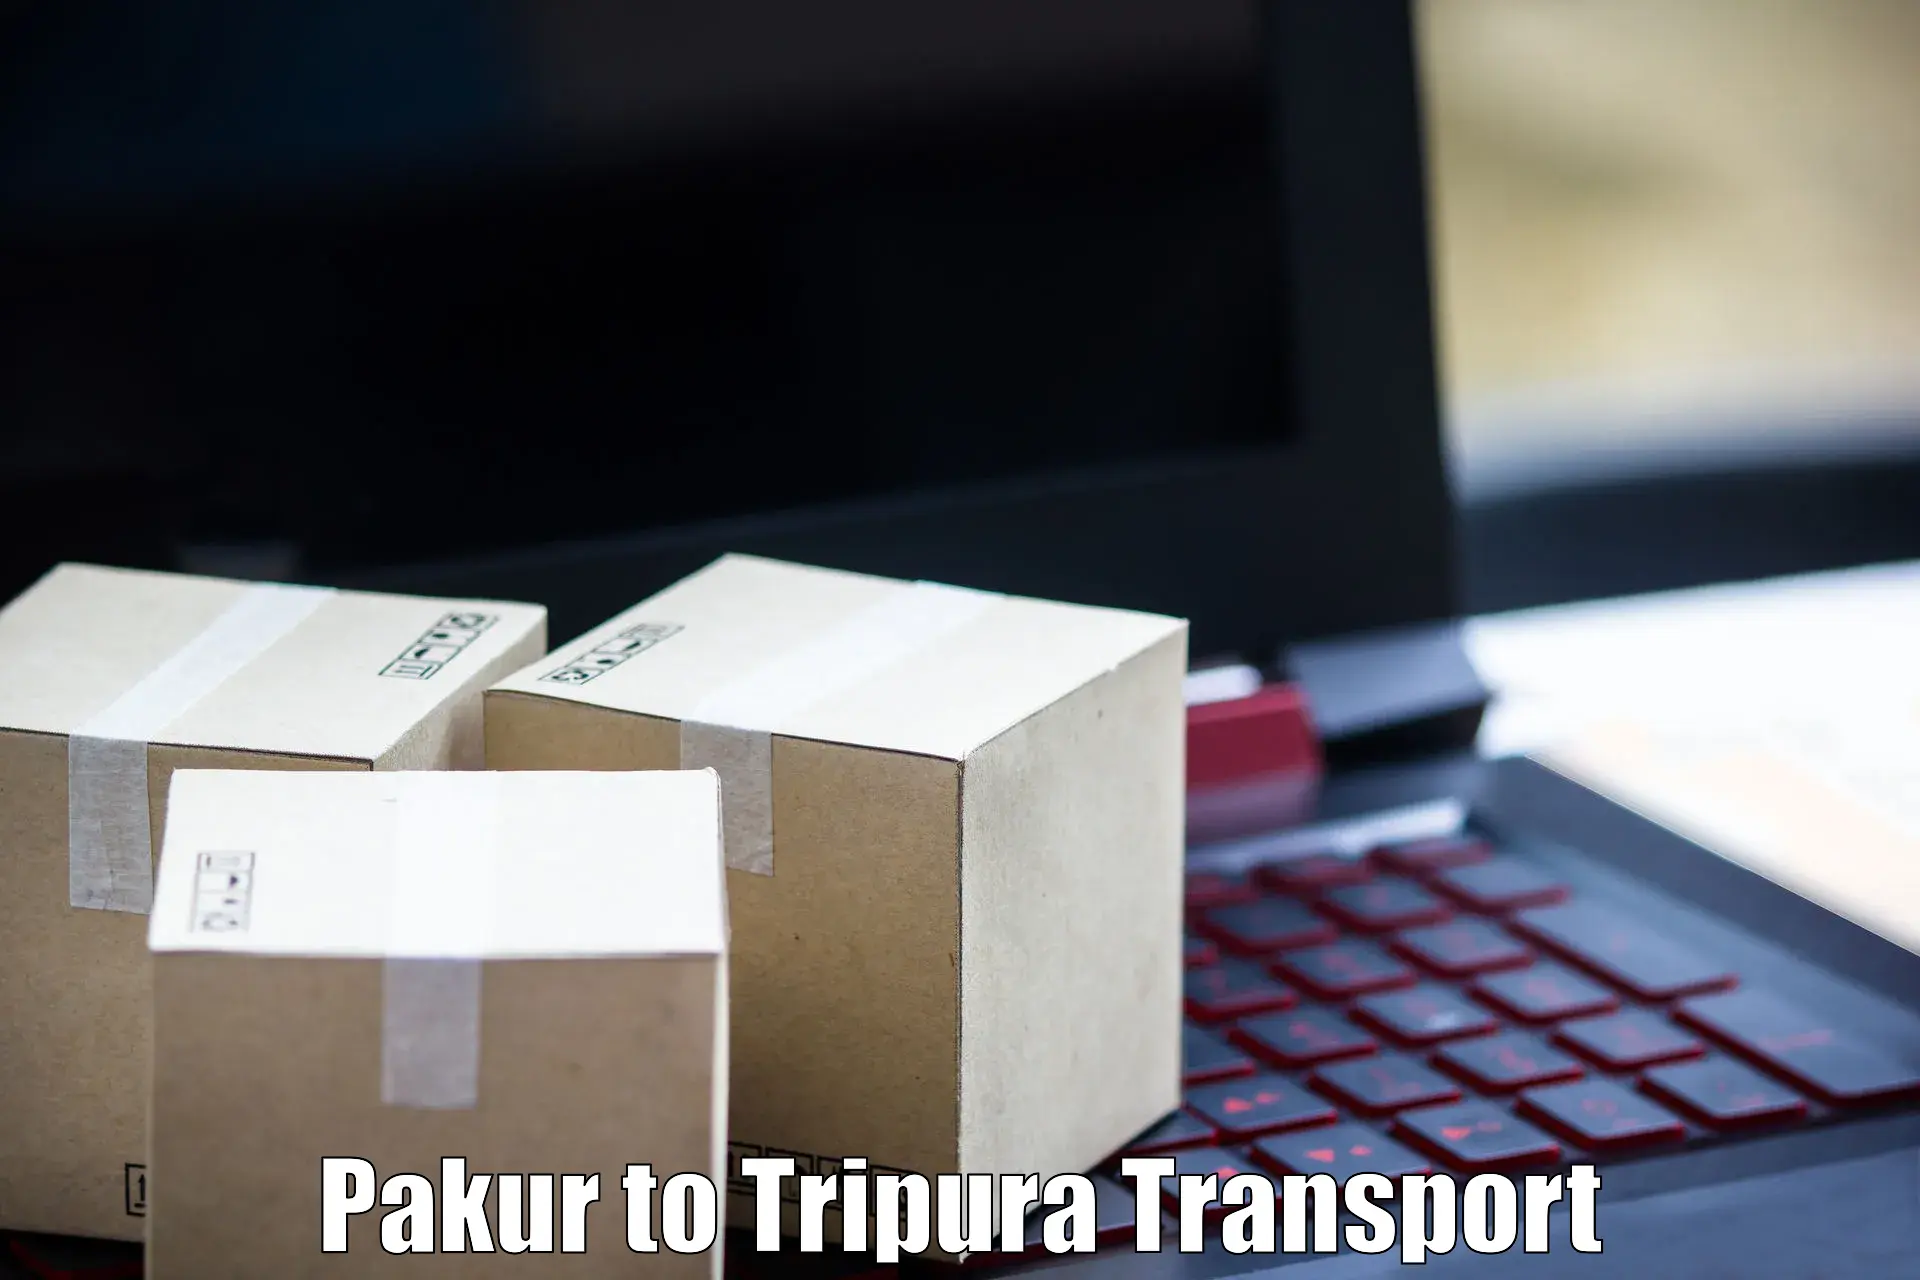 Air freight transport services in Pakur to Udaipur Tripura